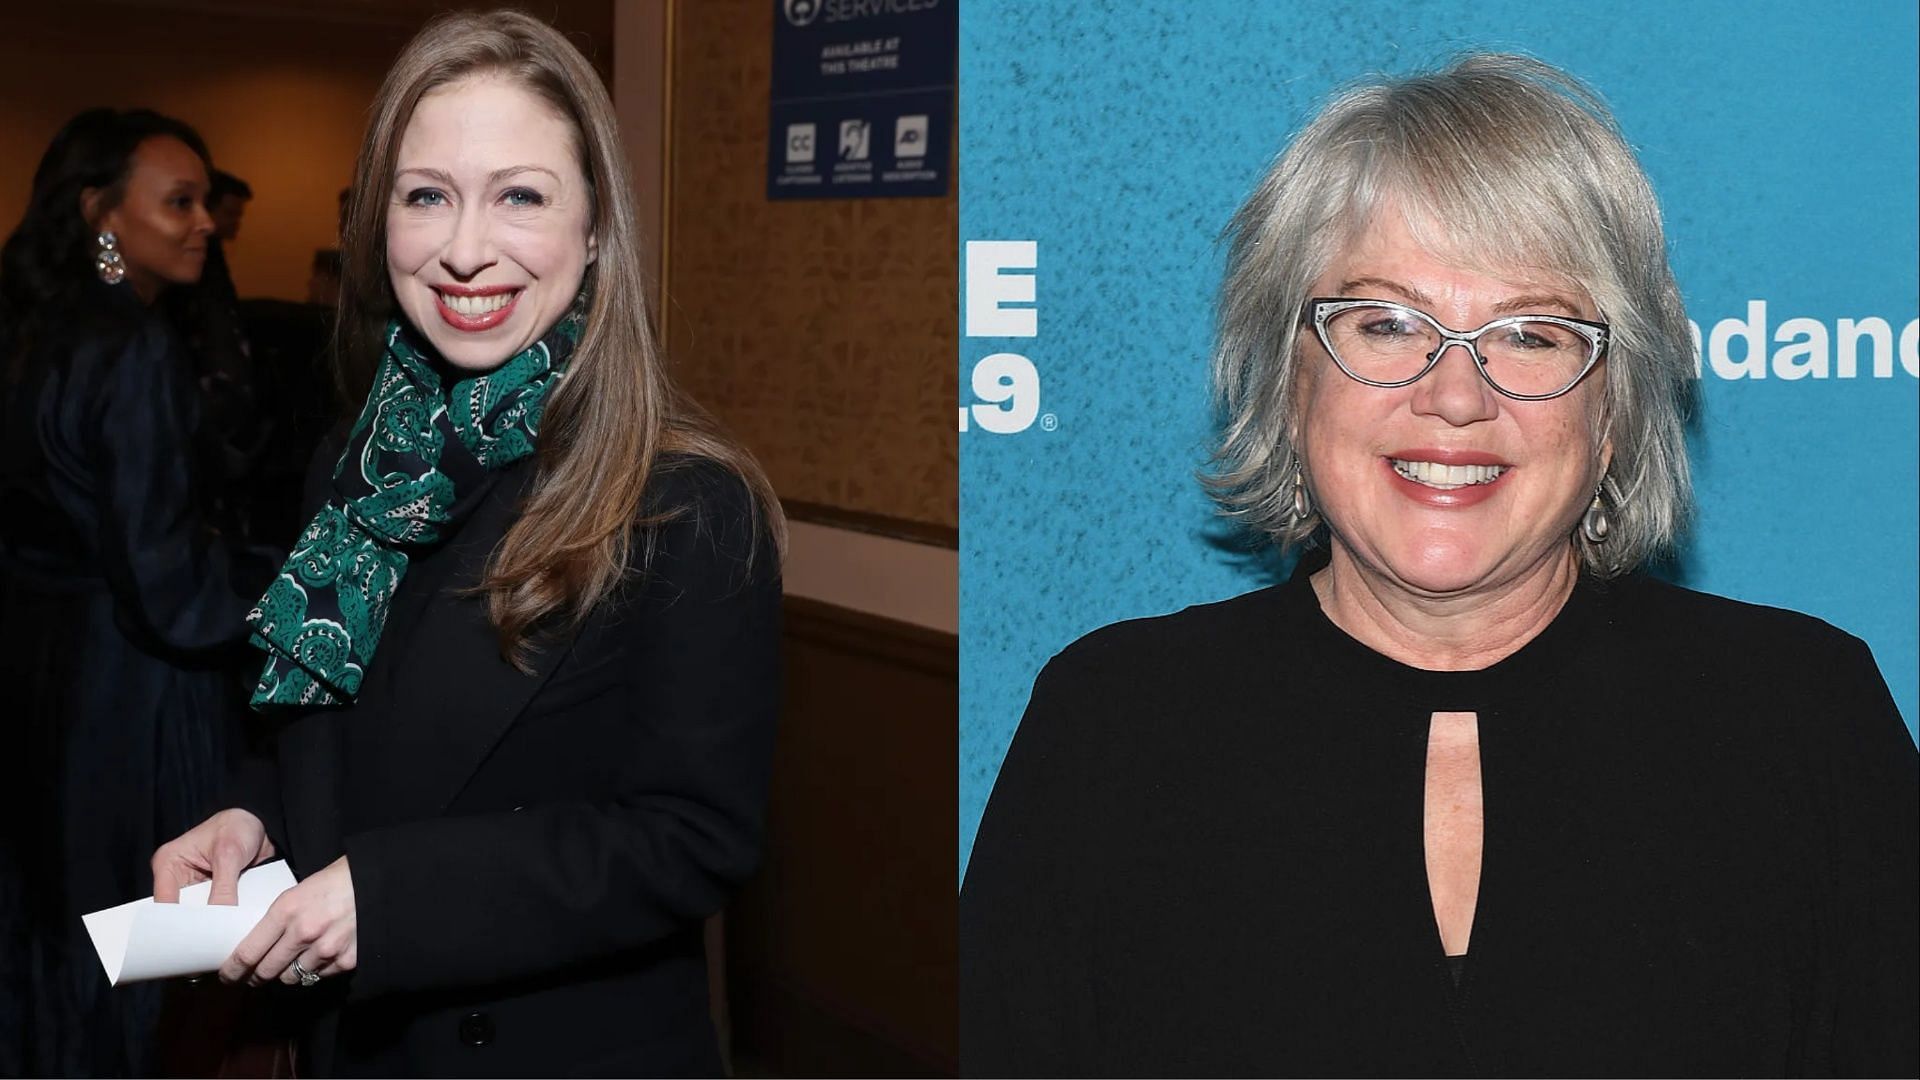 Chelsea Clinton and Julia Sweeney. (Photos via Getty Images)